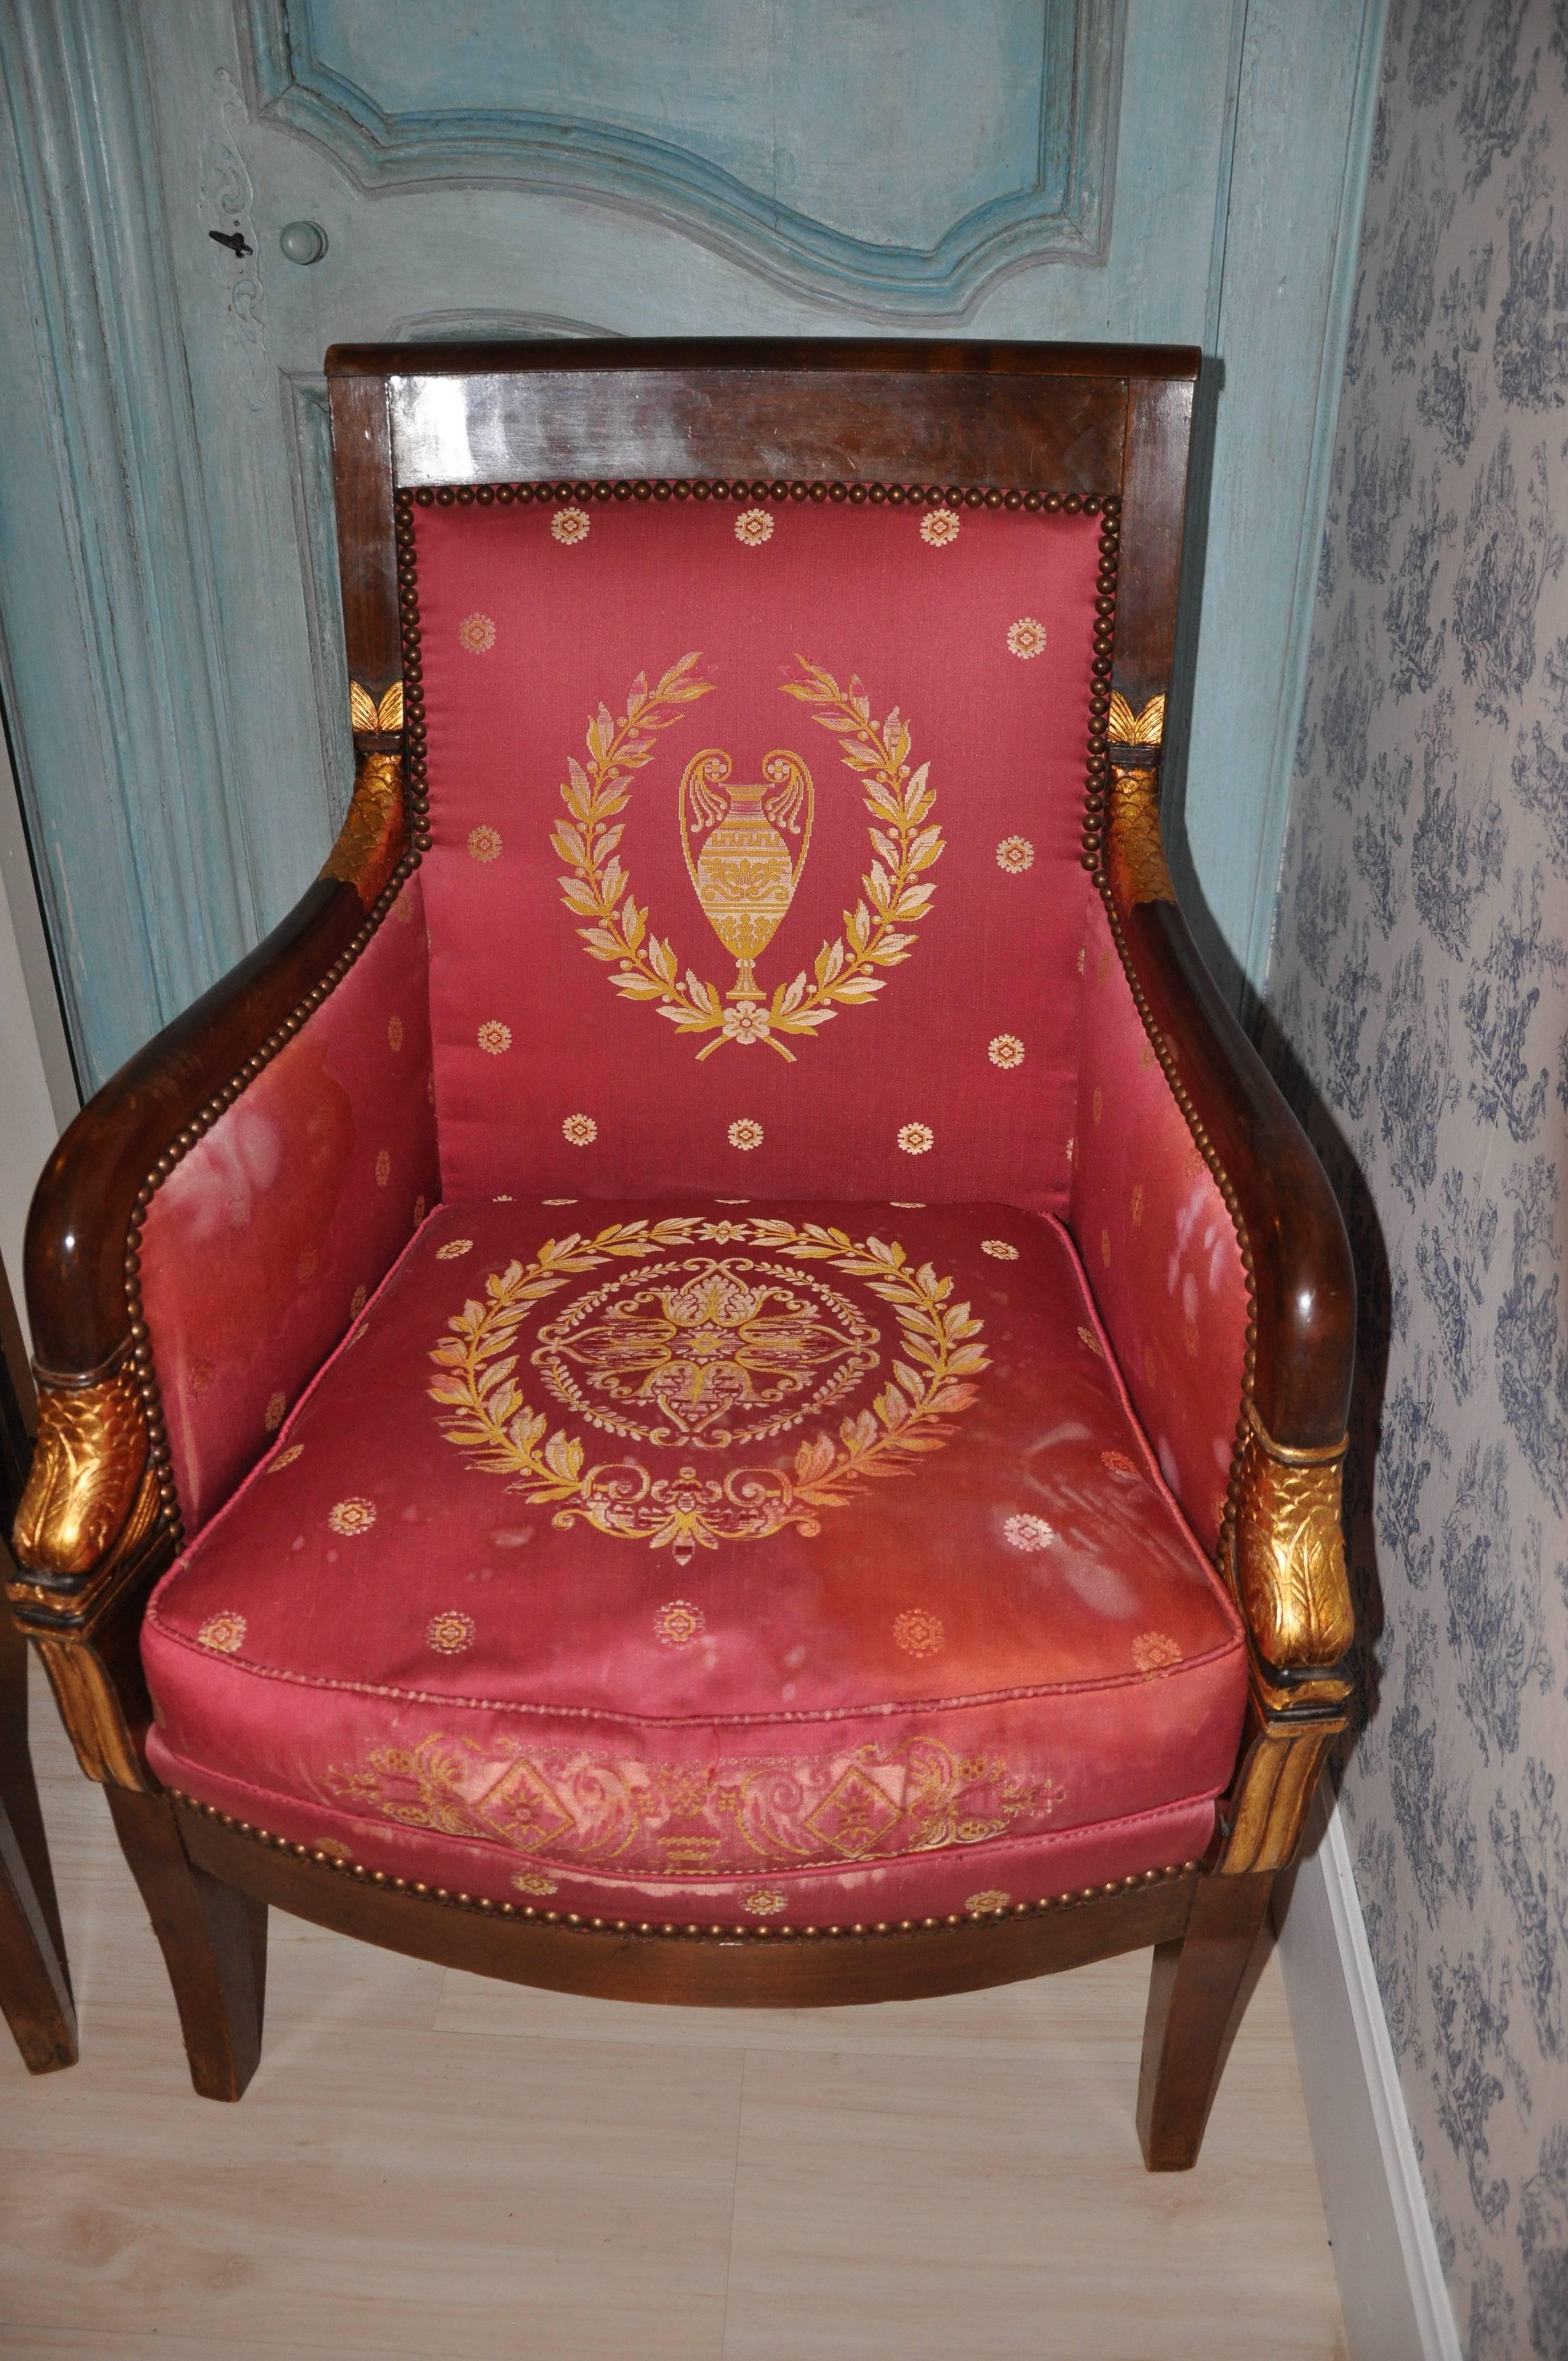 19th Century Rare Pair of Italian Empire Armchairs with Gold Leaf Decorations For Sale 1